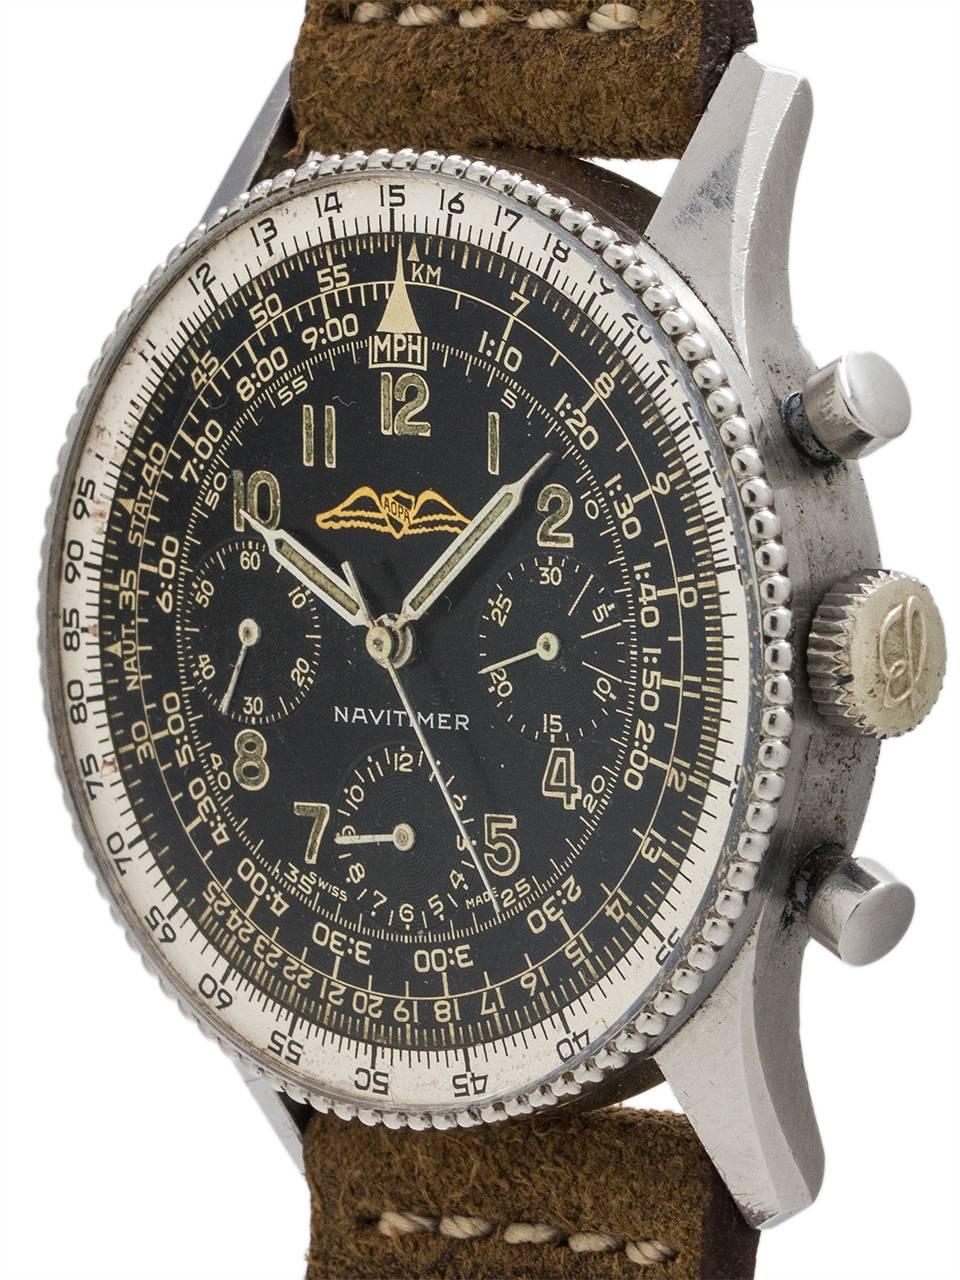 Beautiful condition early vintage Breitling Navitimer ref 806 with AOPA logo, case serial # 929,xxx with early style beaded bezel and all black gilt dial with black registers circa 1960. Featuring a beautiful condition case with beaded bezel,